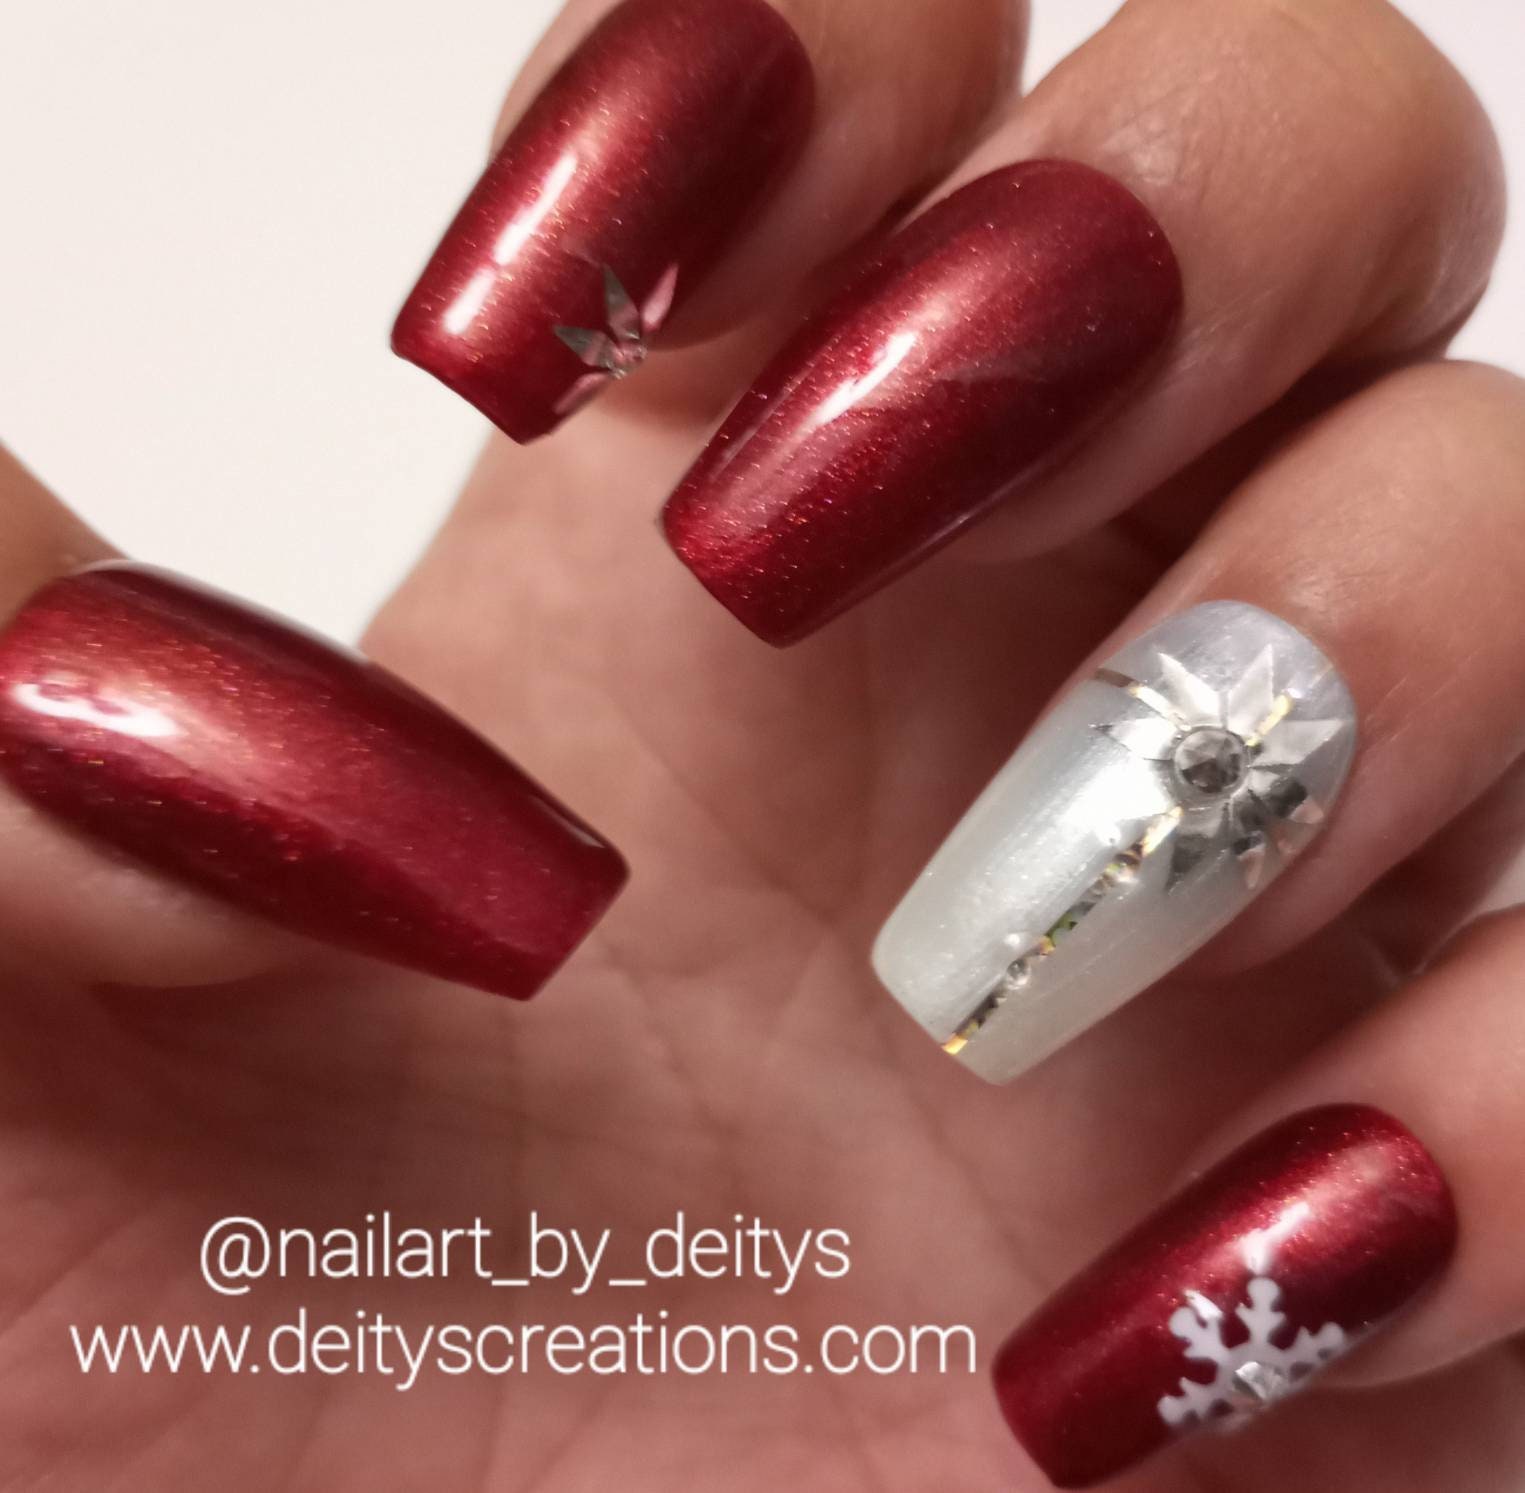 Red and white with silver snowflakes christmas Press Nails, christmas themed acrylic/gel nail set.